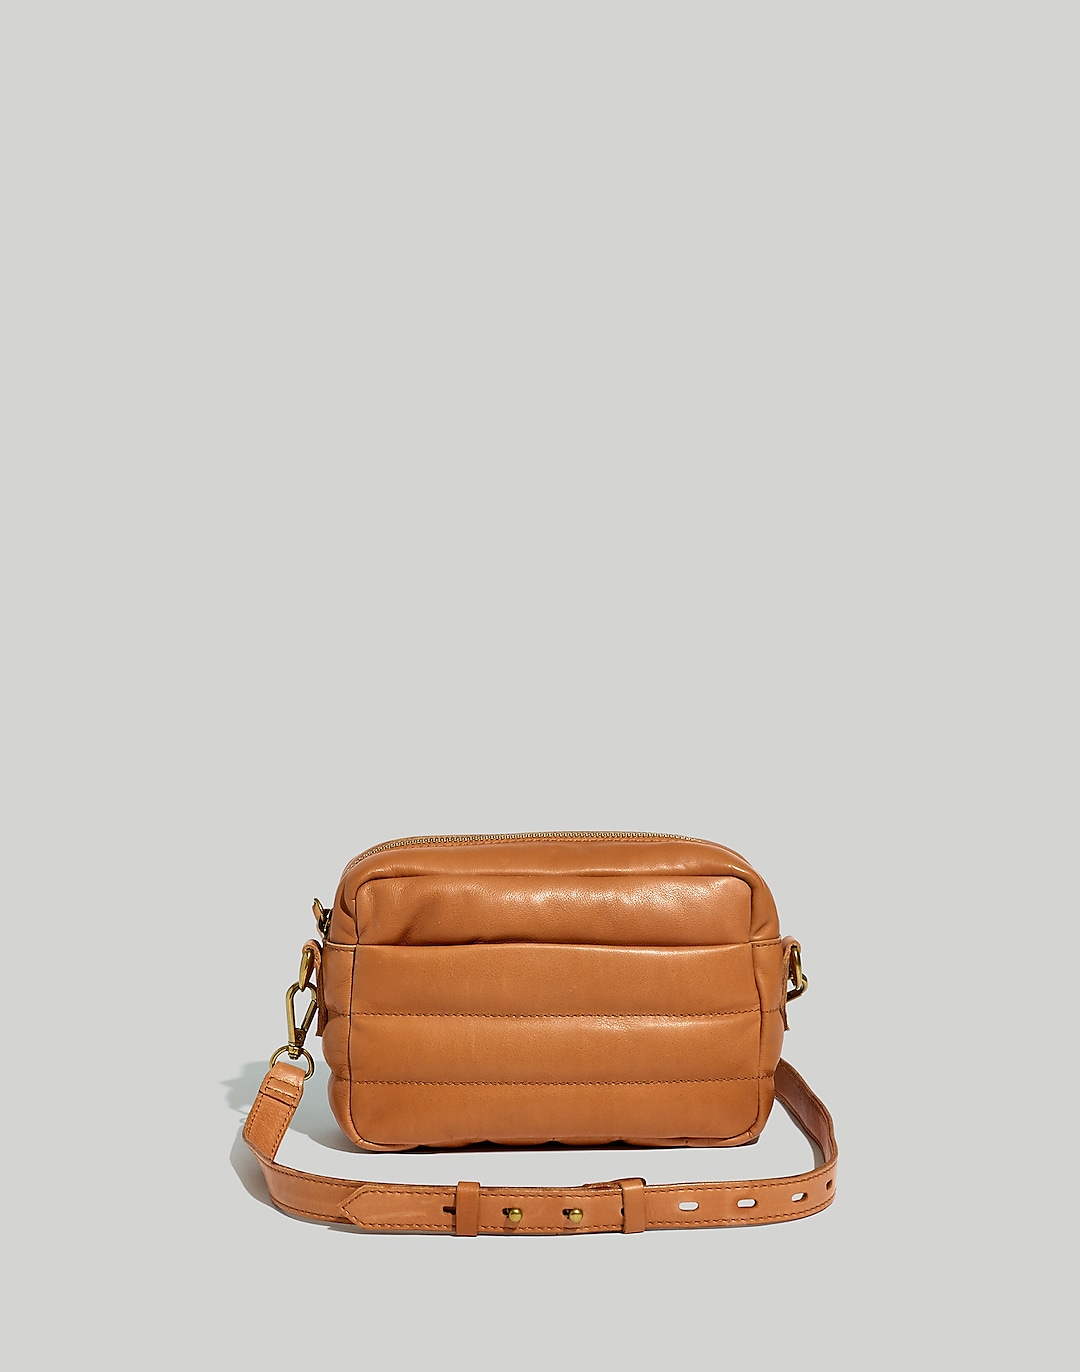 Transport Camera Bag by Madewell for $20